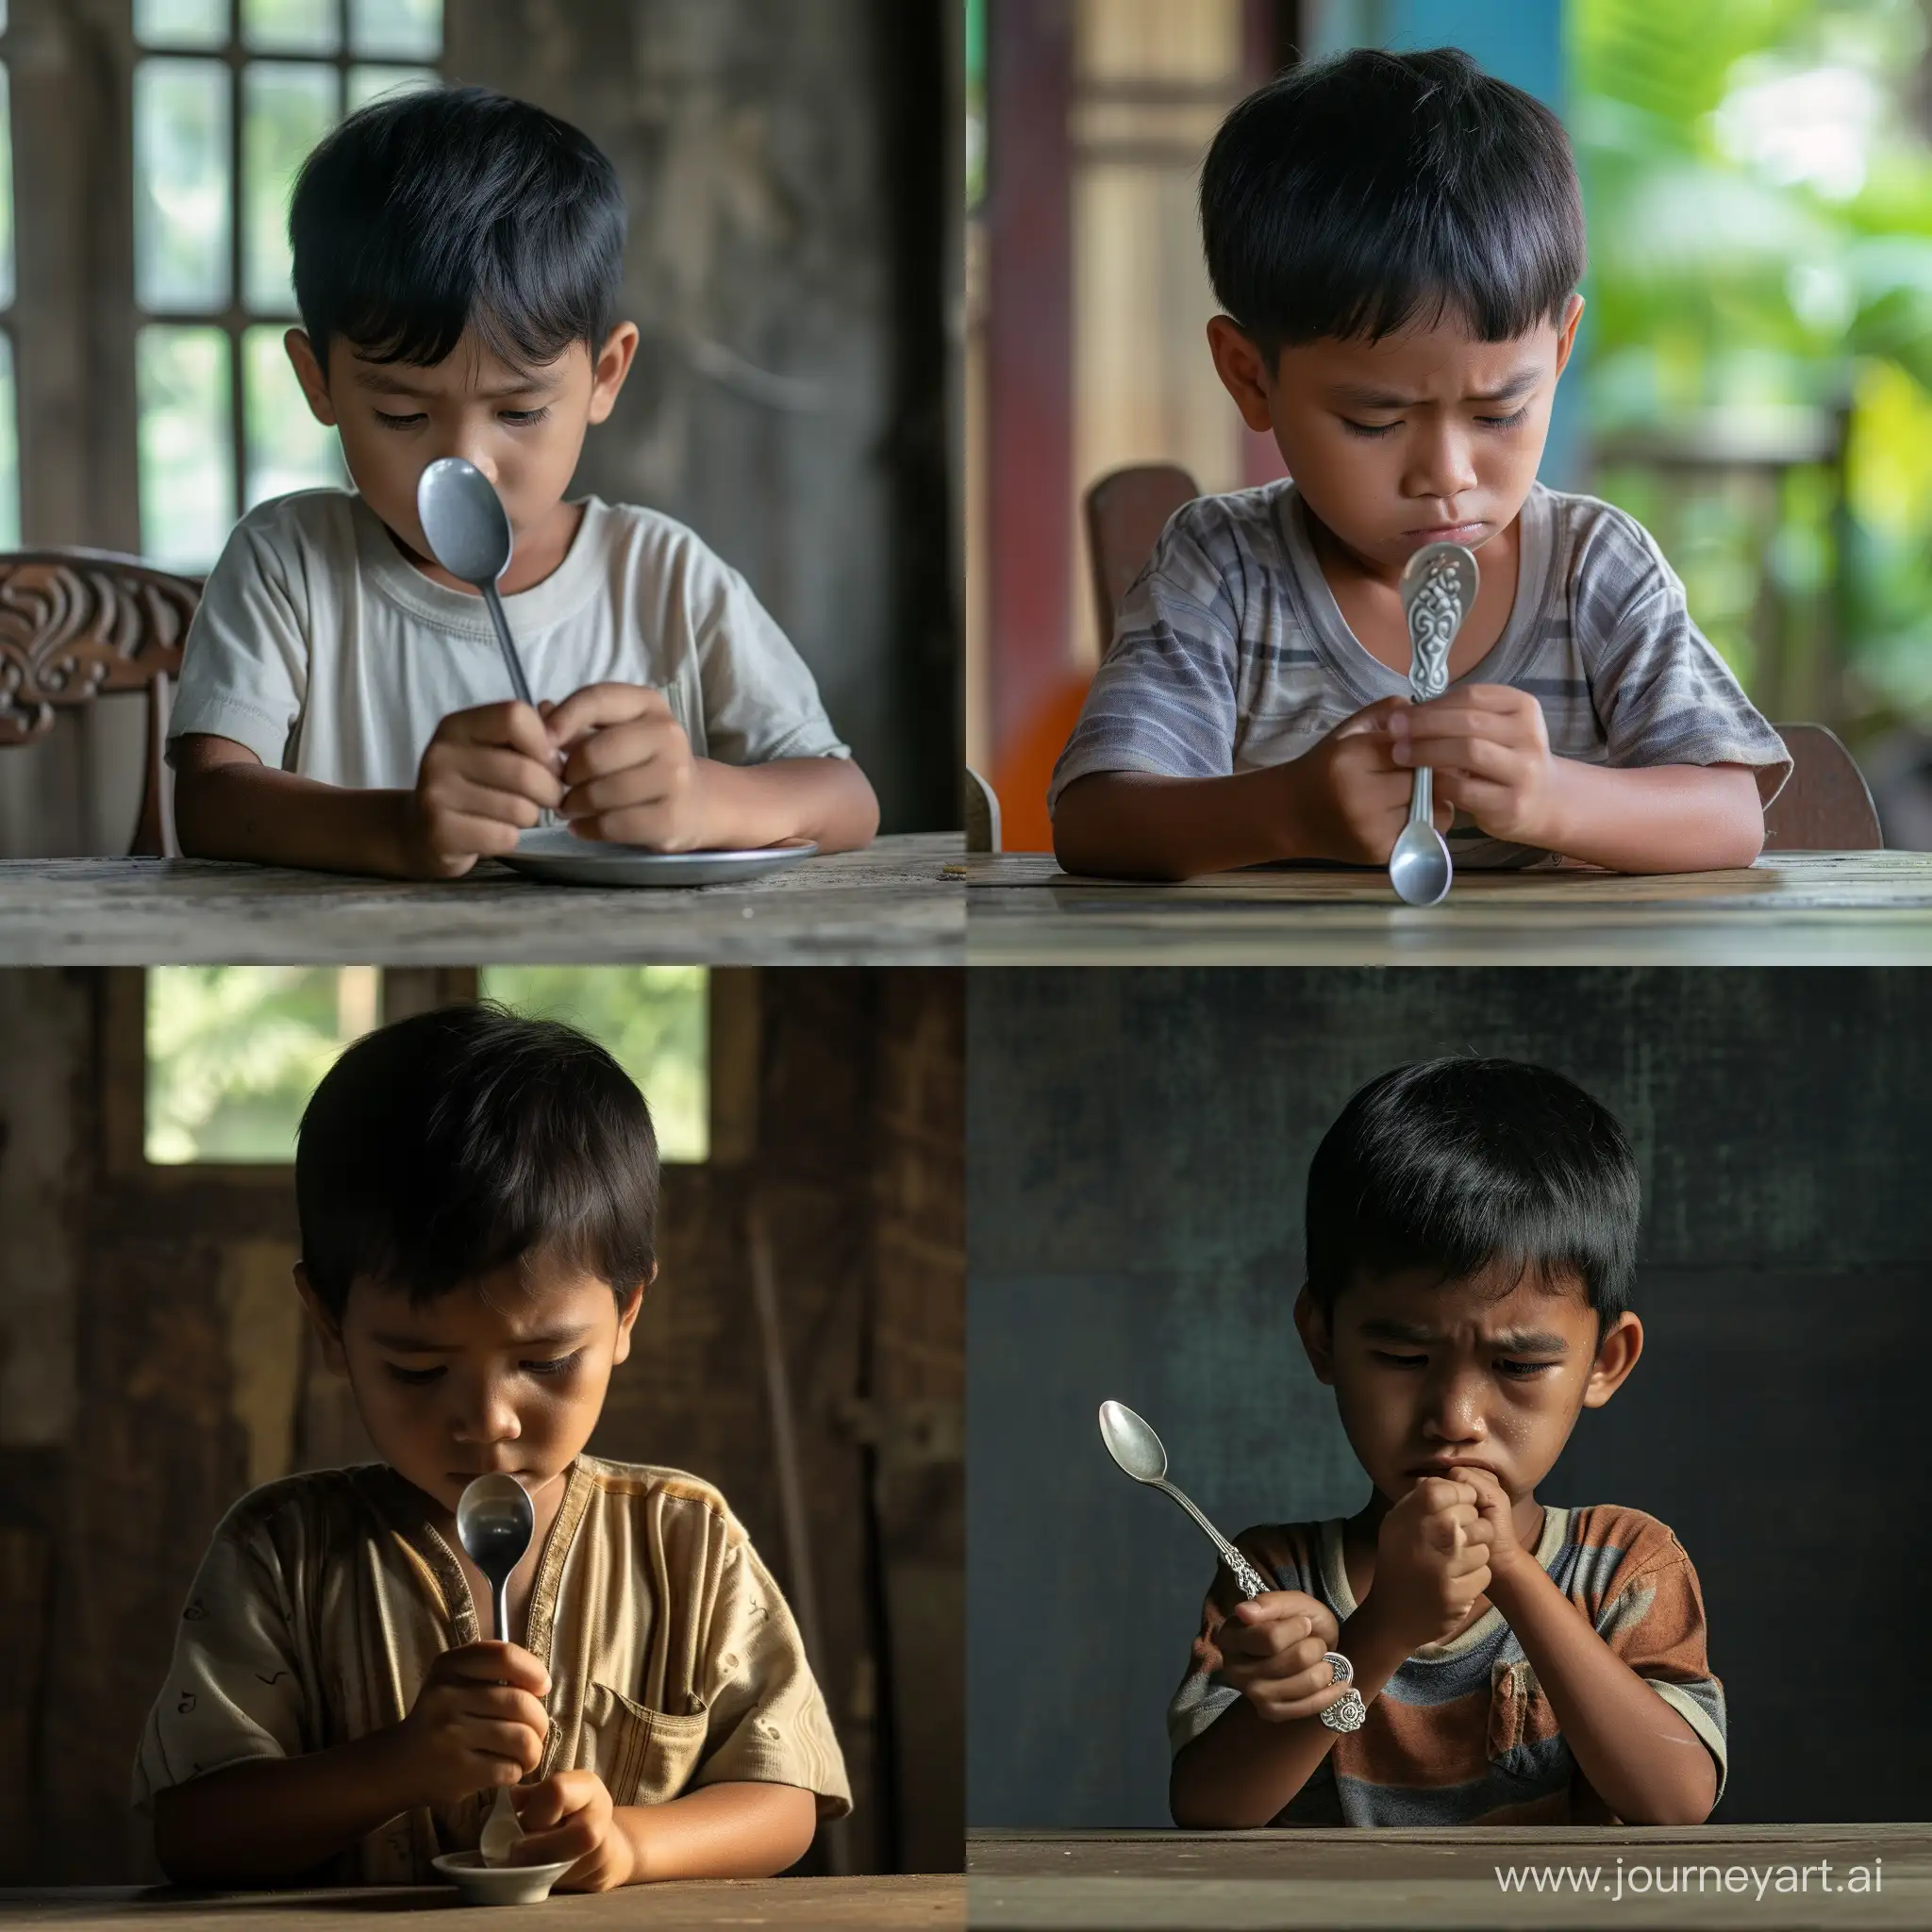 Concerned-Indonesian-Boy-with-Spoon-at-Dining-Table-Scene